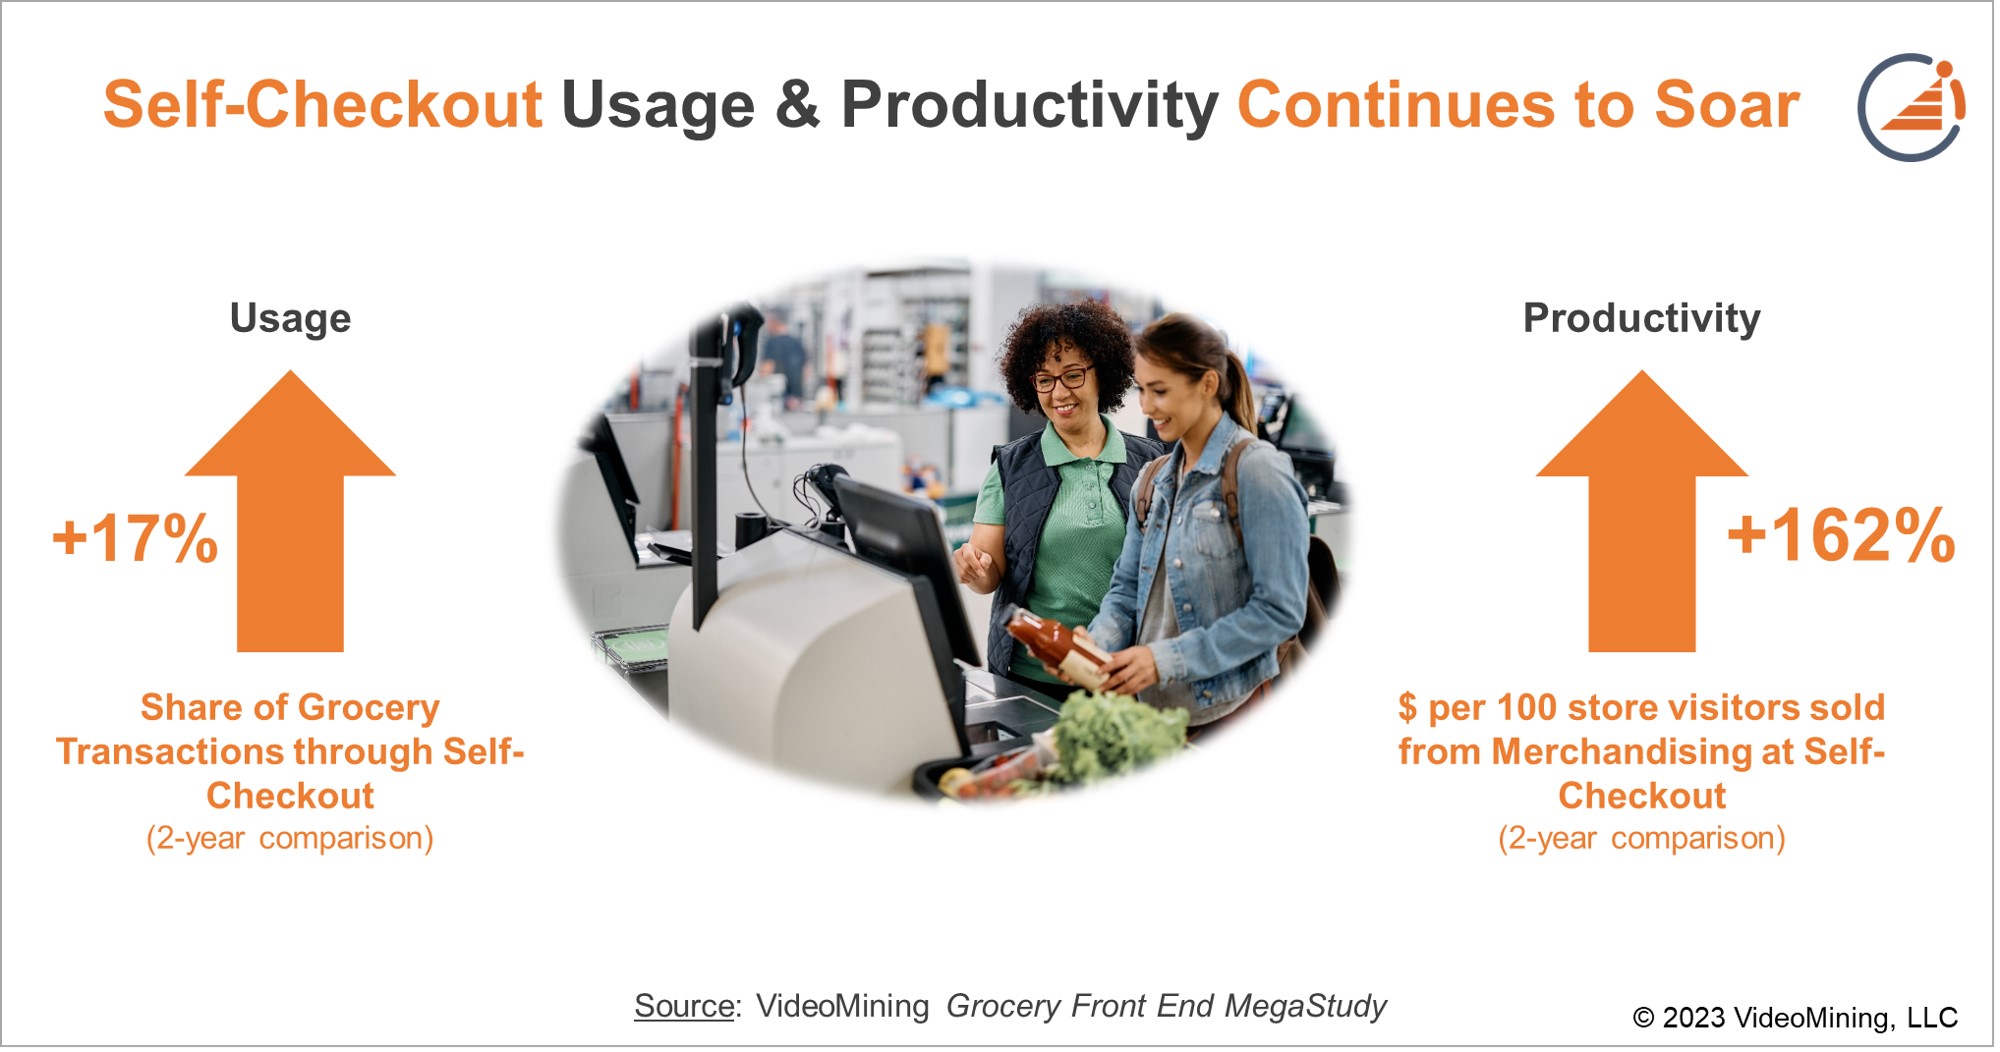 Self-Checkout Usage & Productivity Continues to Soar